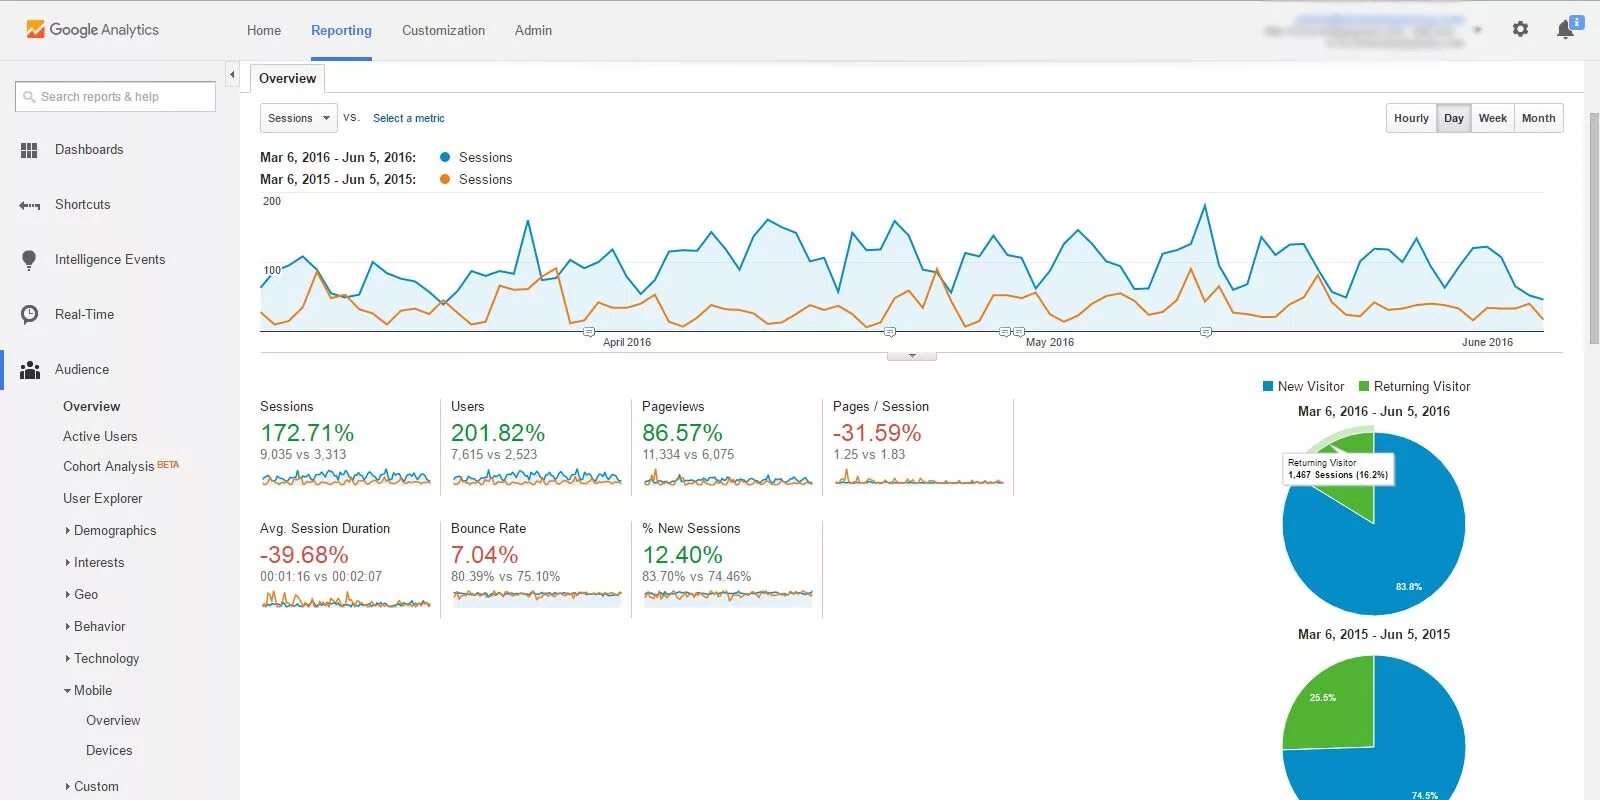 Session pages. Скрины гугл аналитикс. Аналитика скрин. Аналитика Скриншот. Google Analytics screenshot.